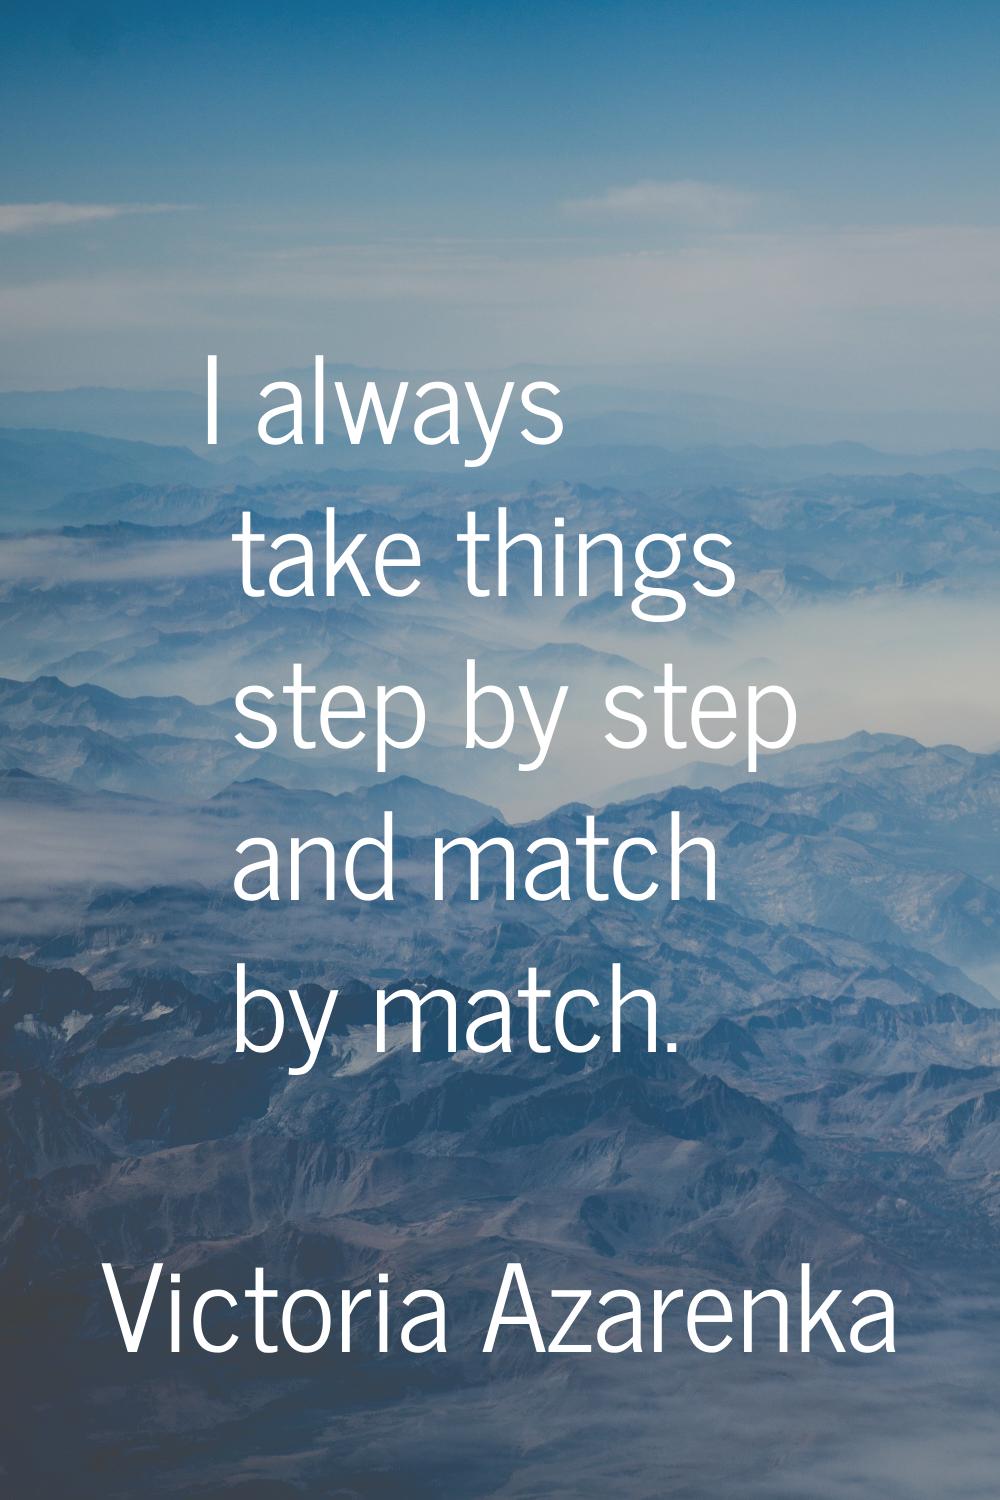 I always take things step by step and match by match.